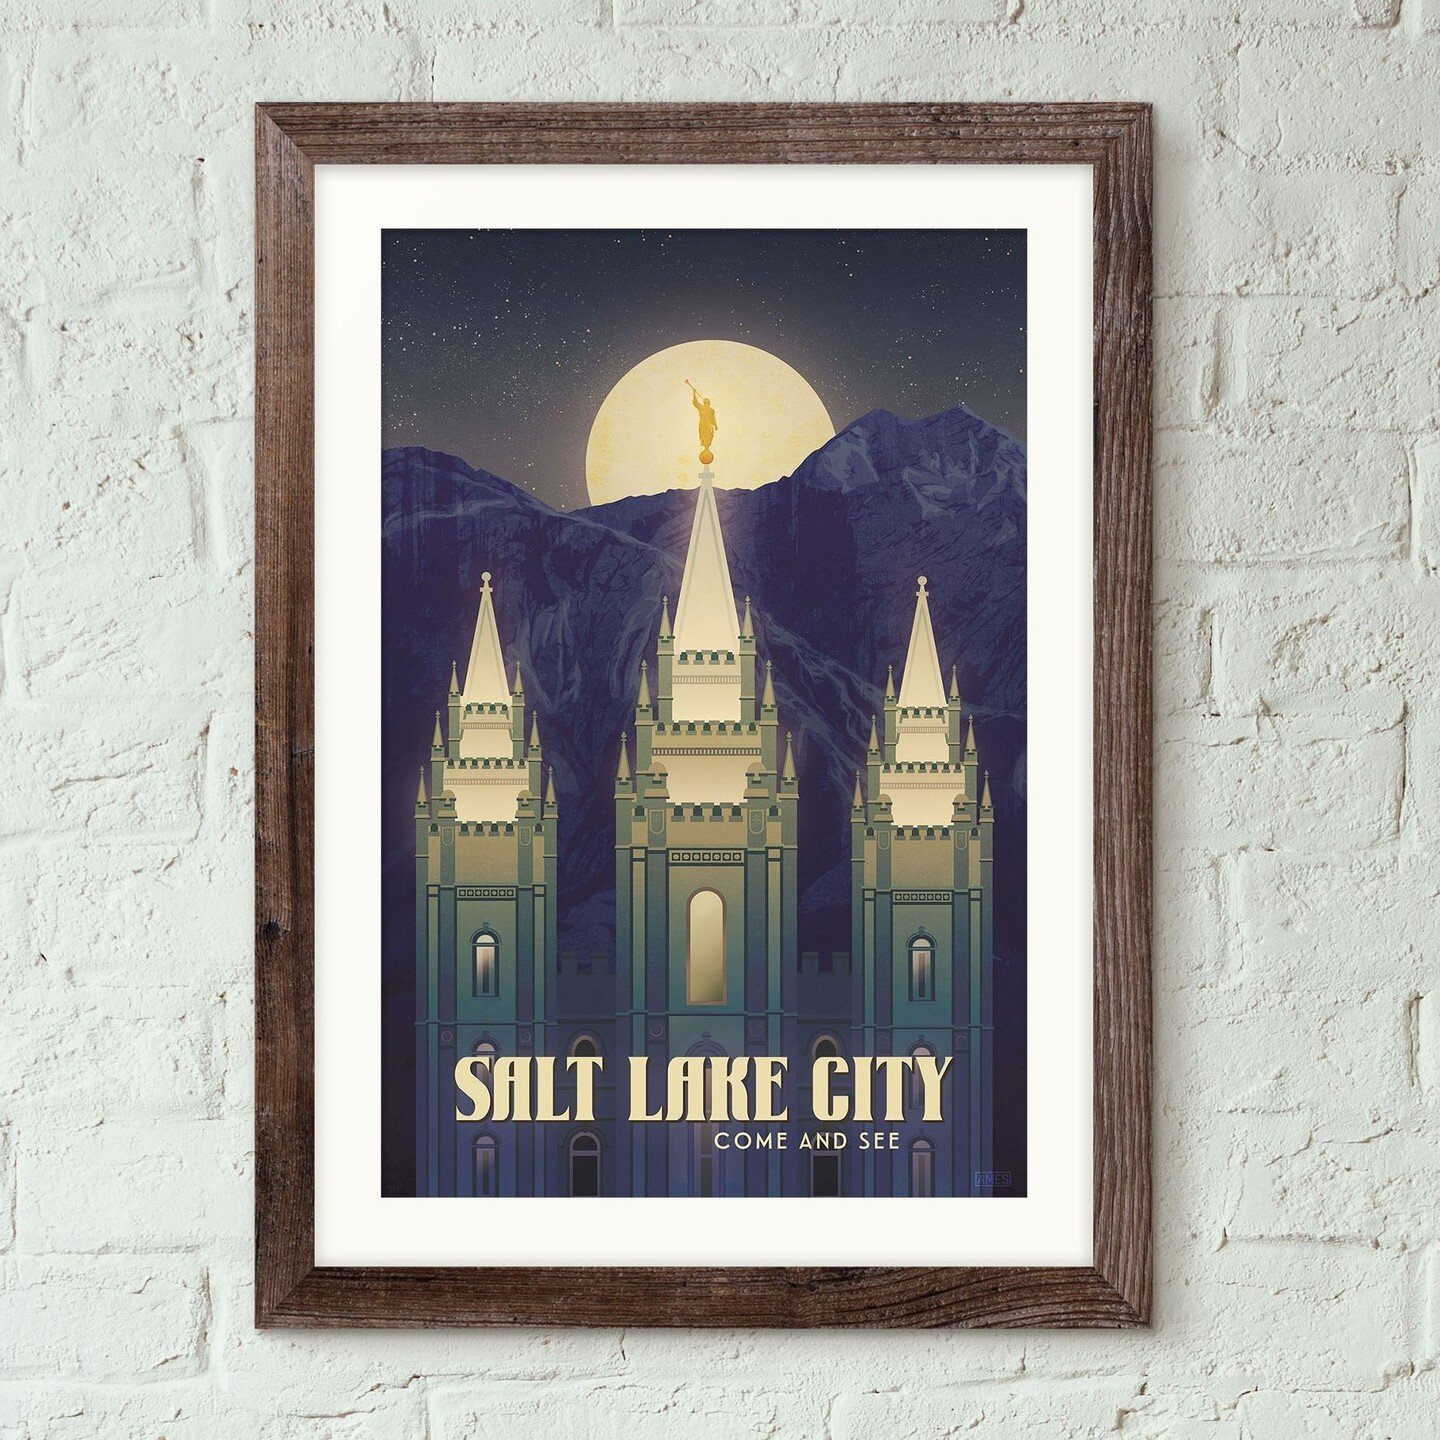 Anyone heading to see the Christmas lights tonight? This print of the SLC temple is now available in my shop.⁠
⁠
#saltlake #saltlaketemple #seeutah